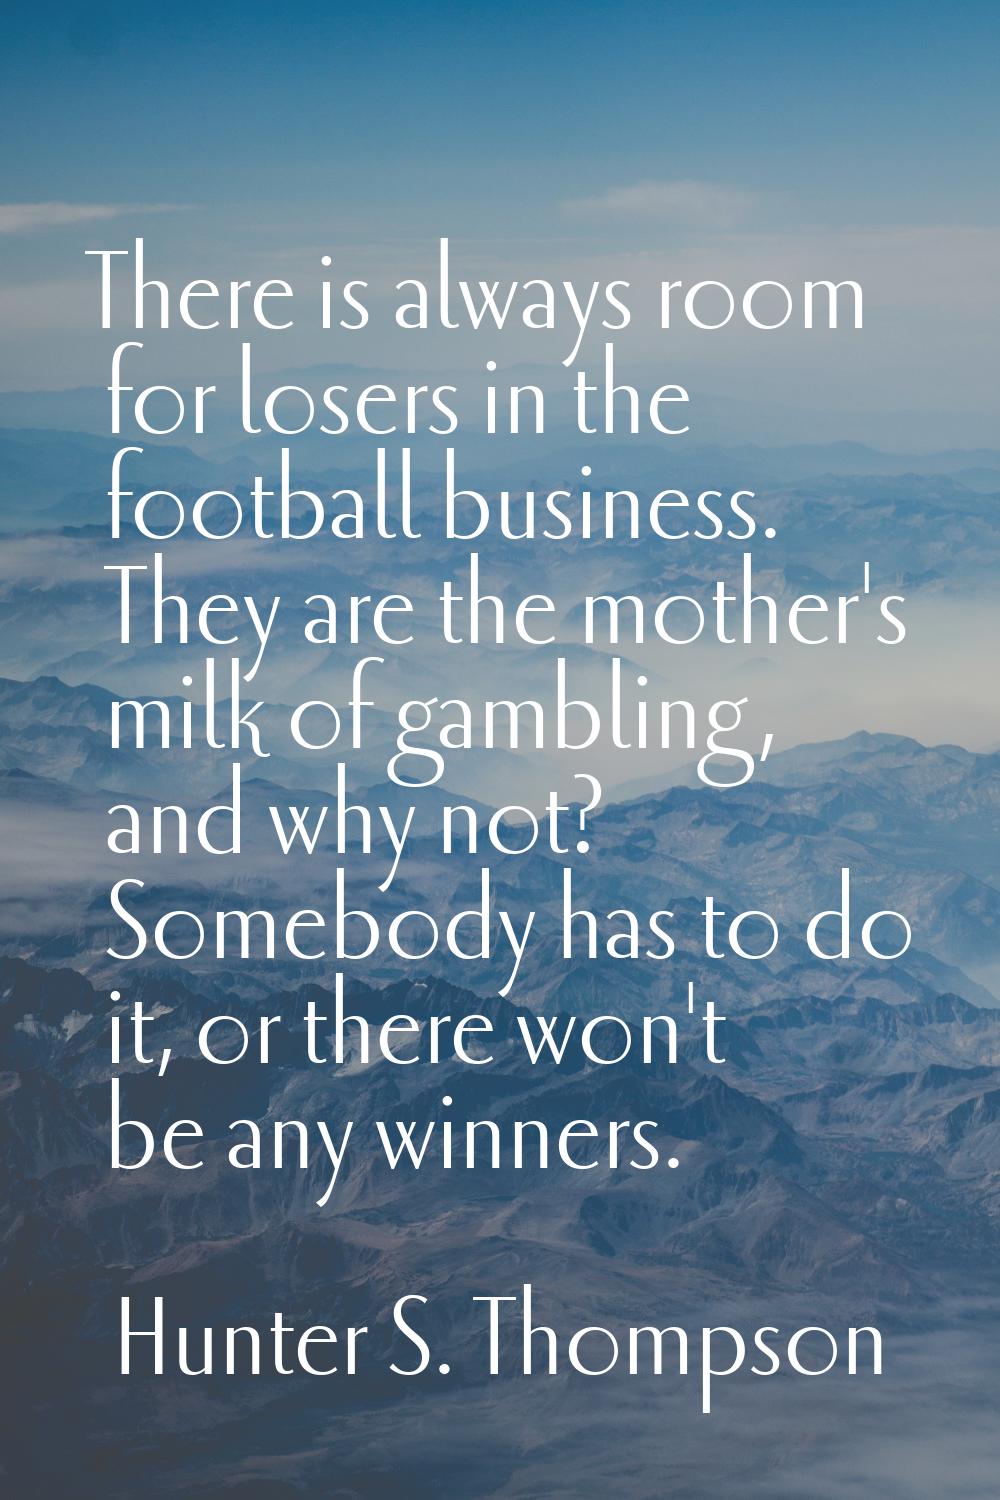 There is always room for losers in the football business. They are the mother's milk of gambling, a